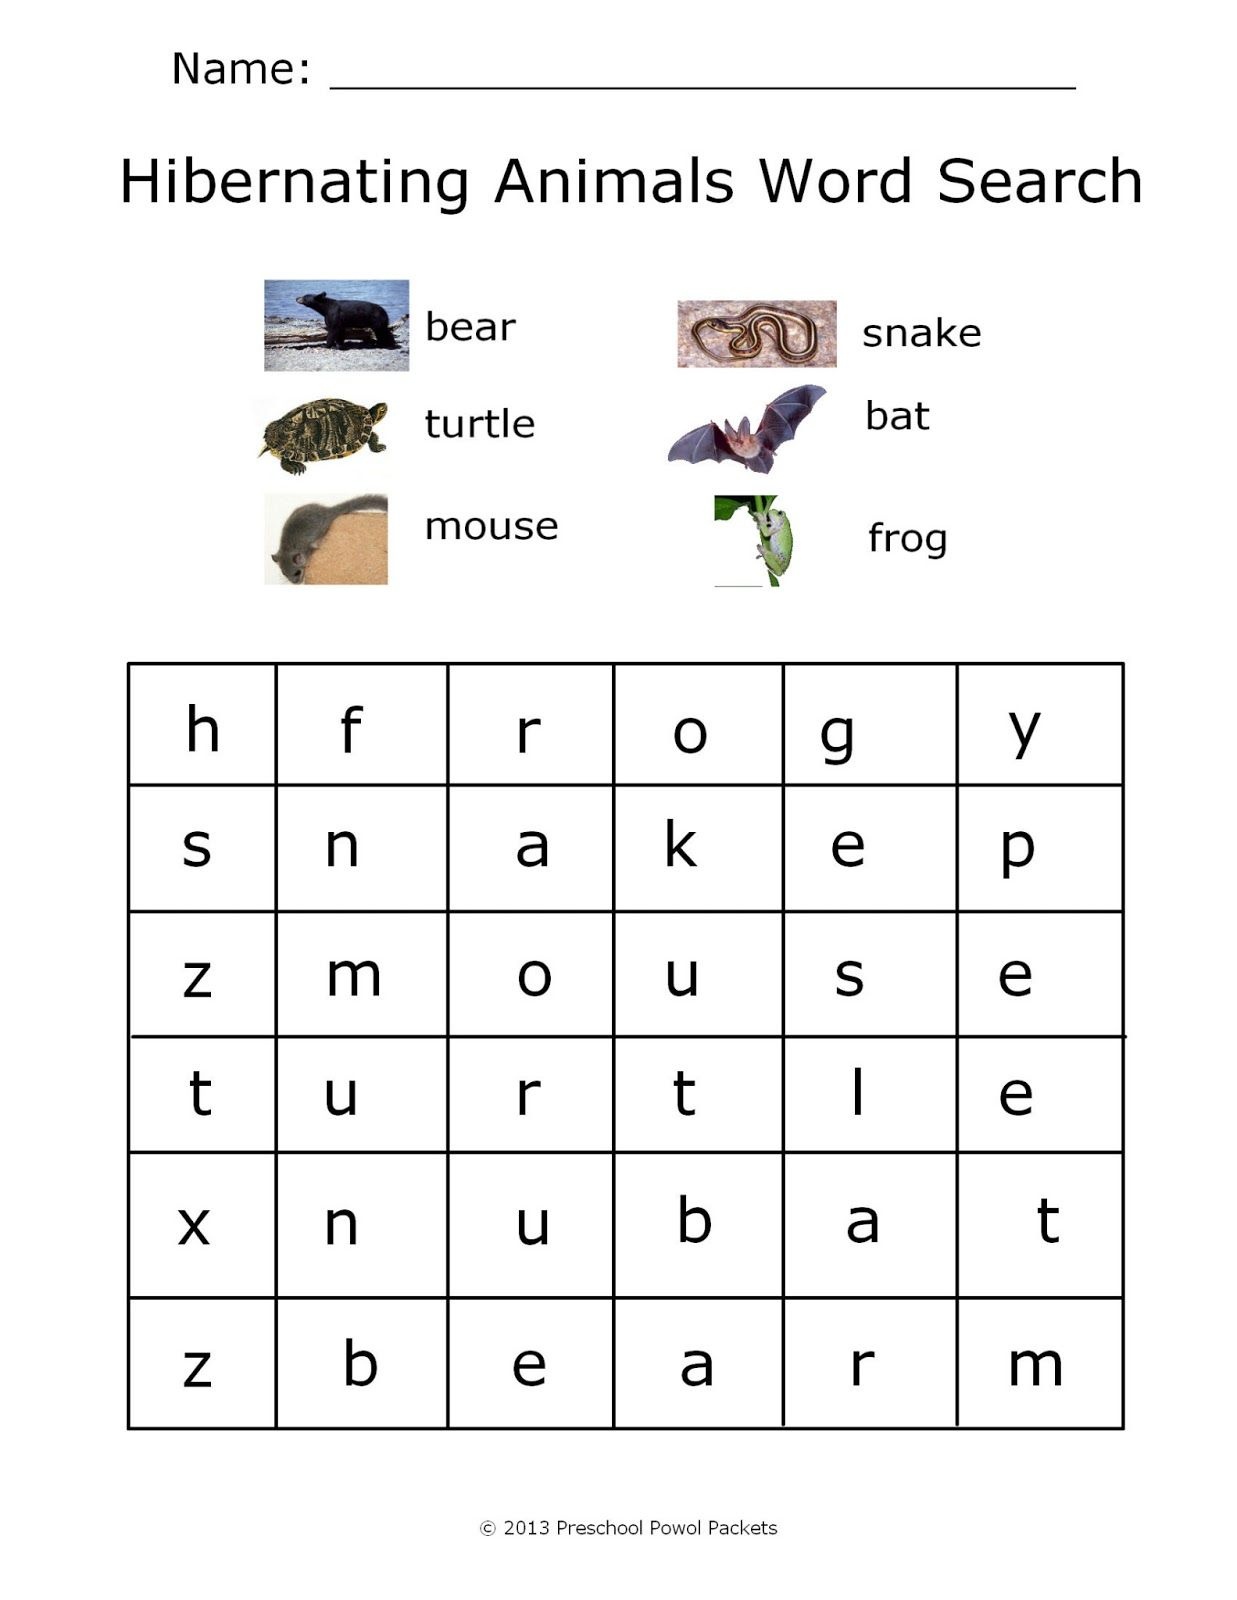 Animal search